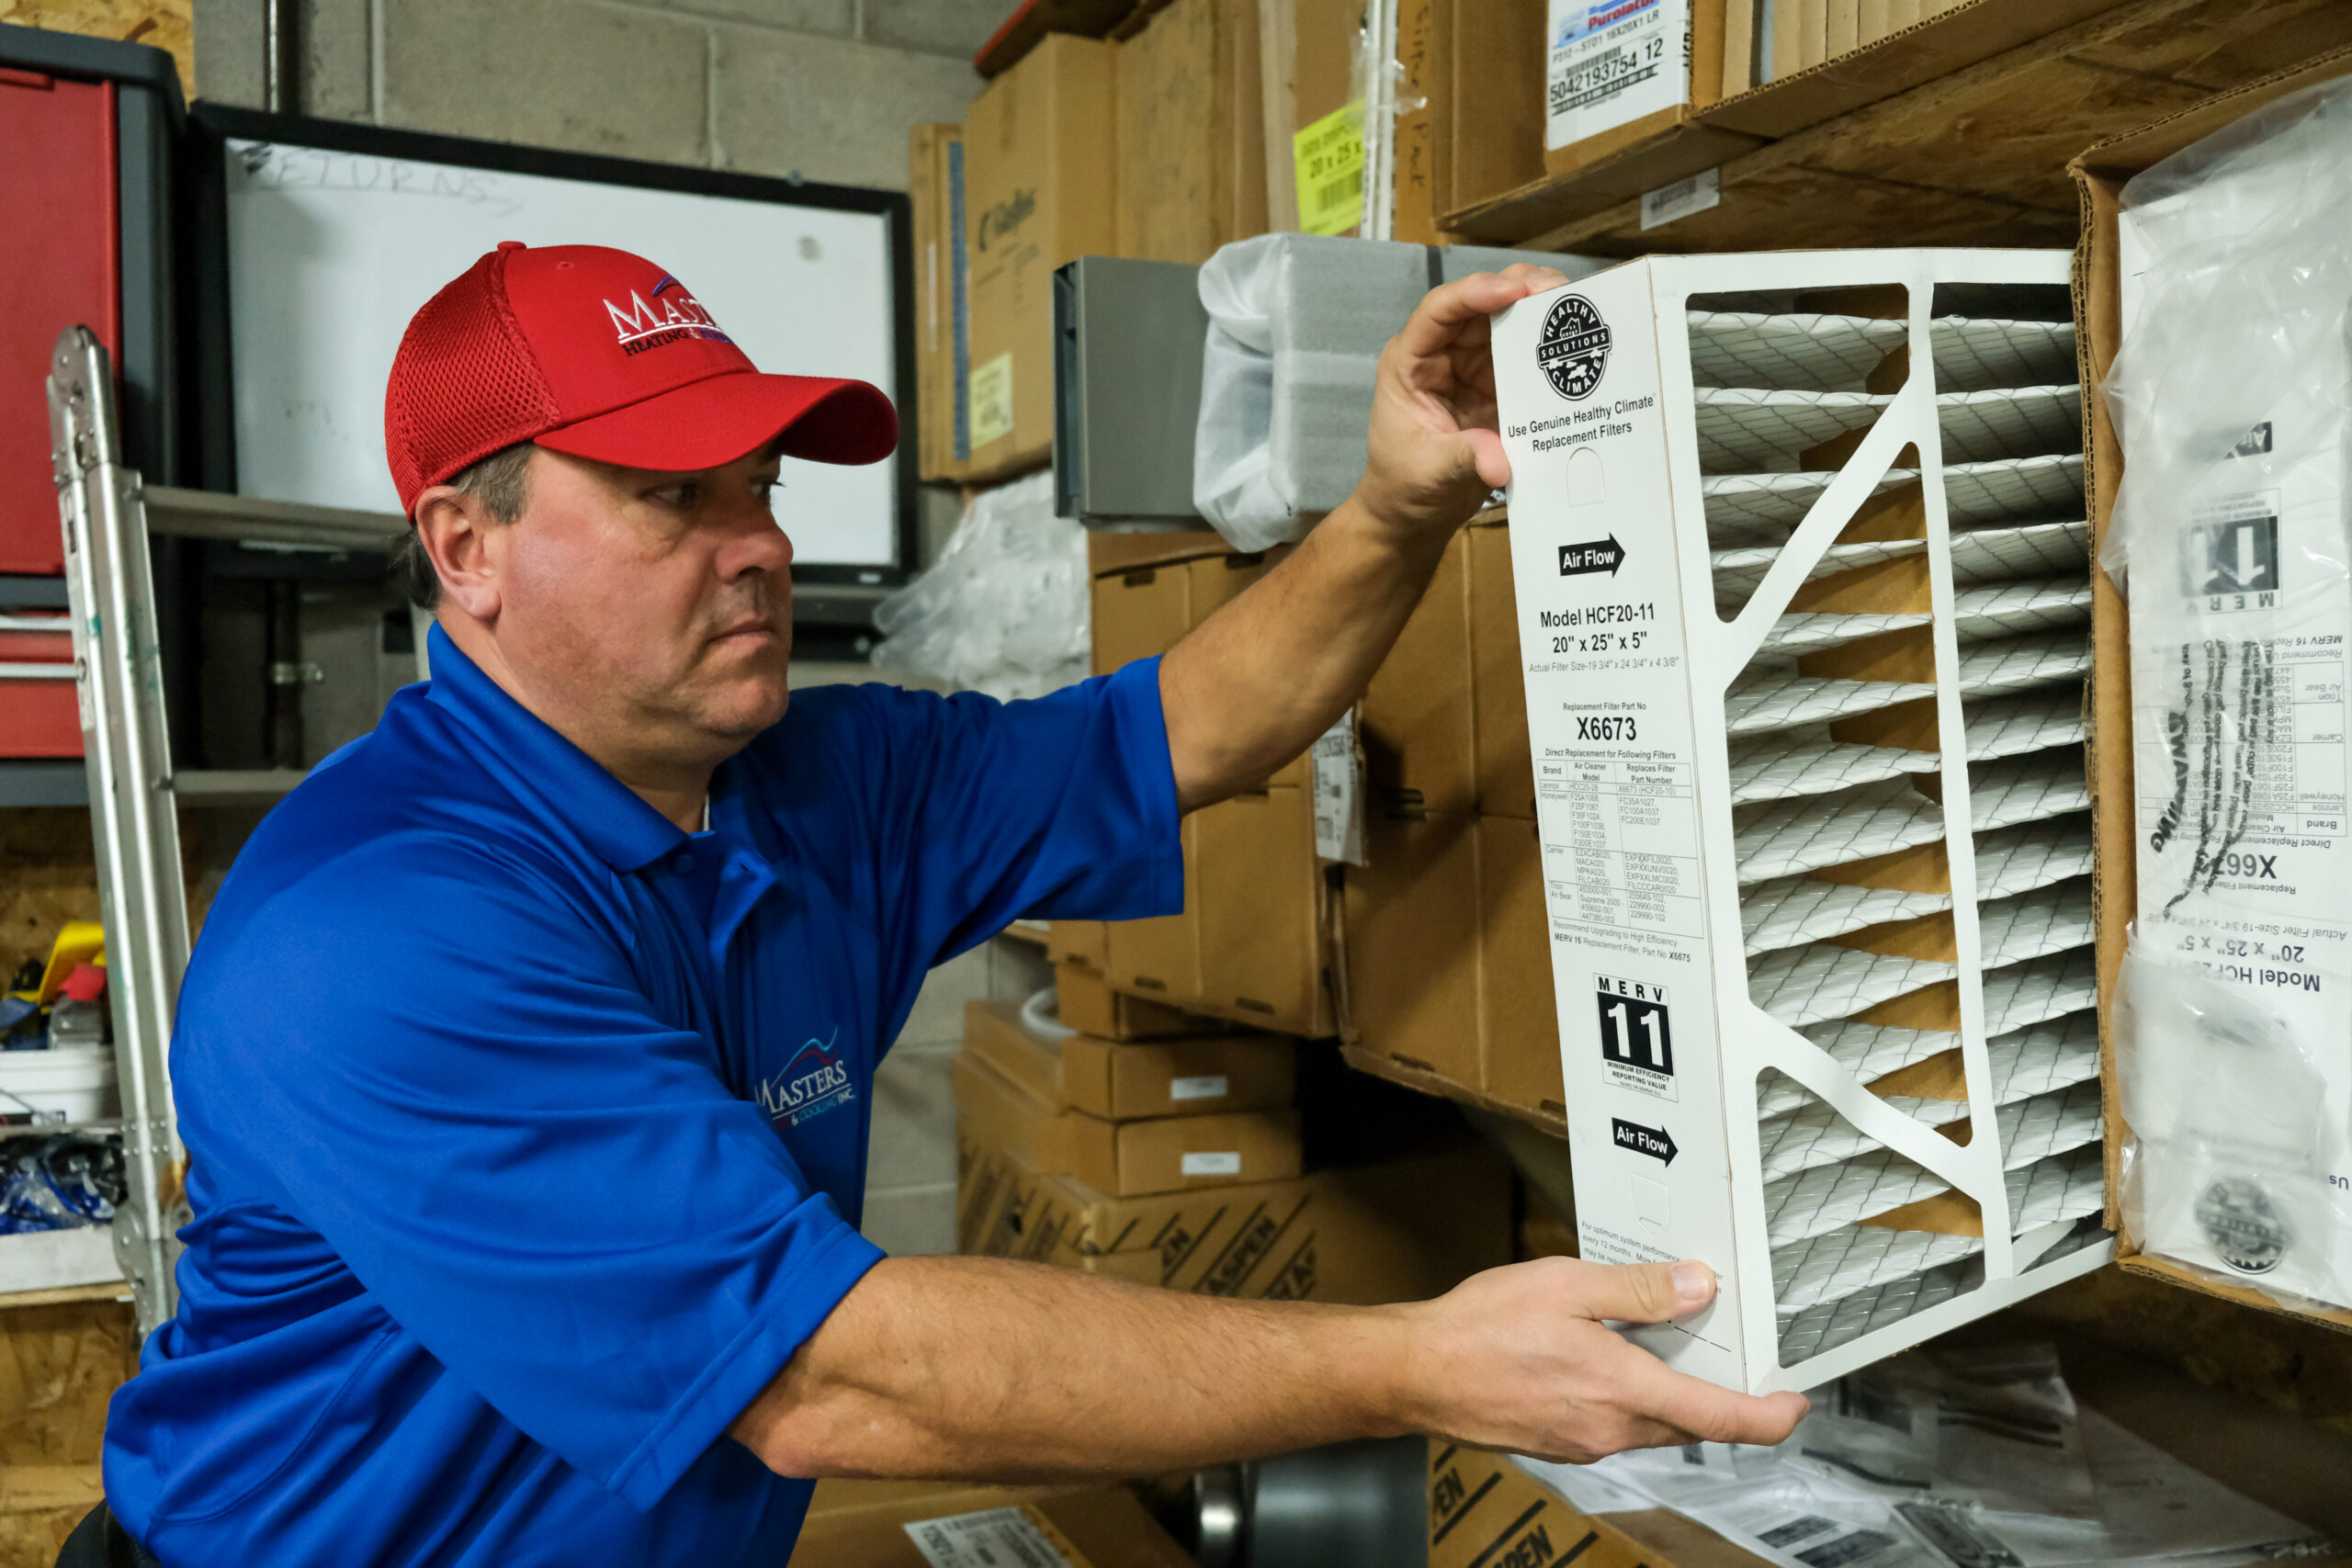 Masters Heating & Cooling technician preparing for an AC repair service appointment by getting a new air filter off the shelf